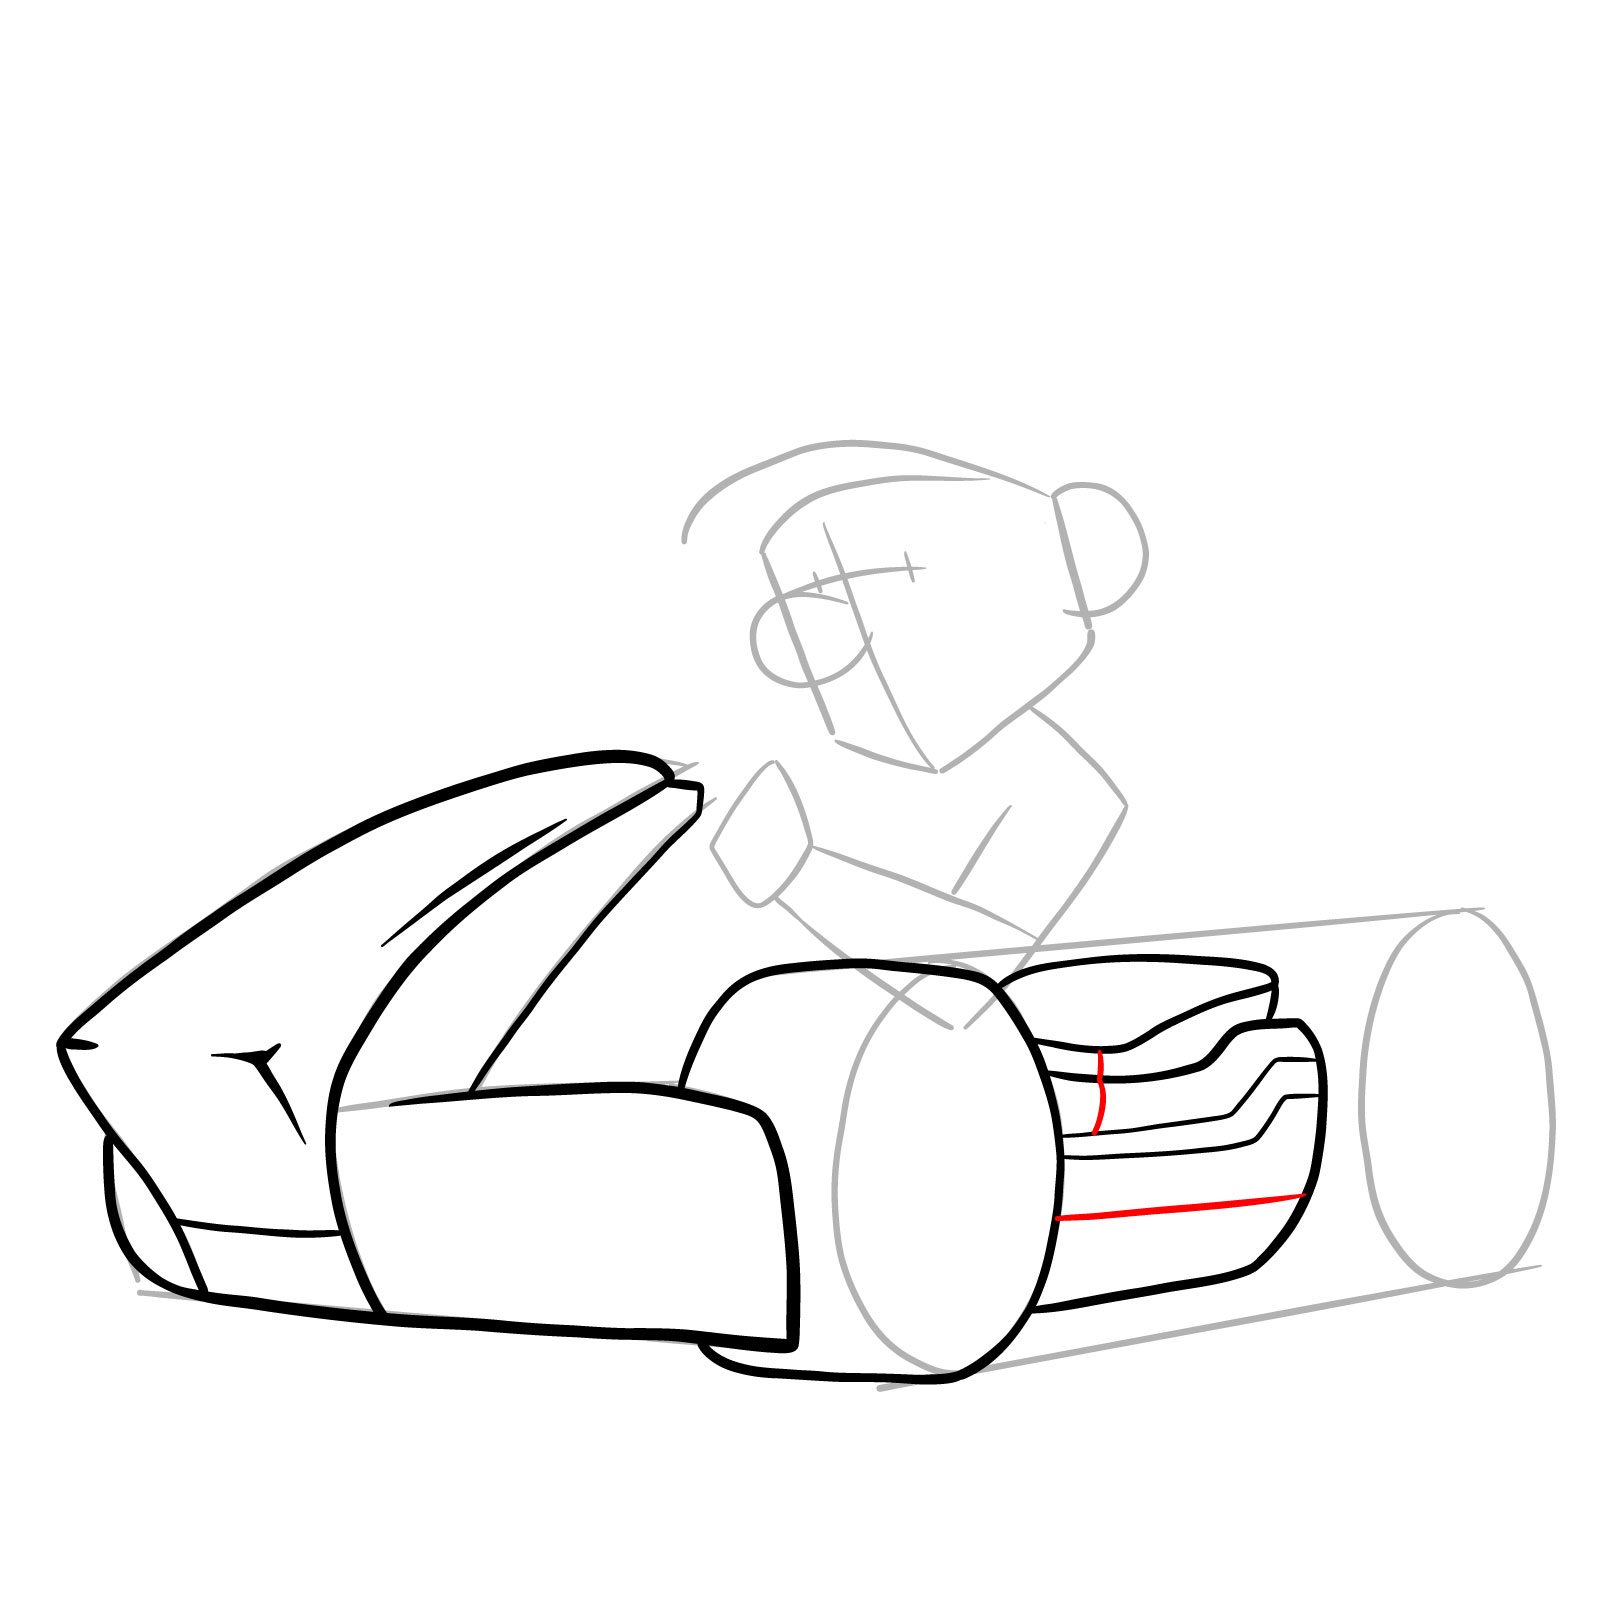 How to draw Race Traitors Mario - step 12